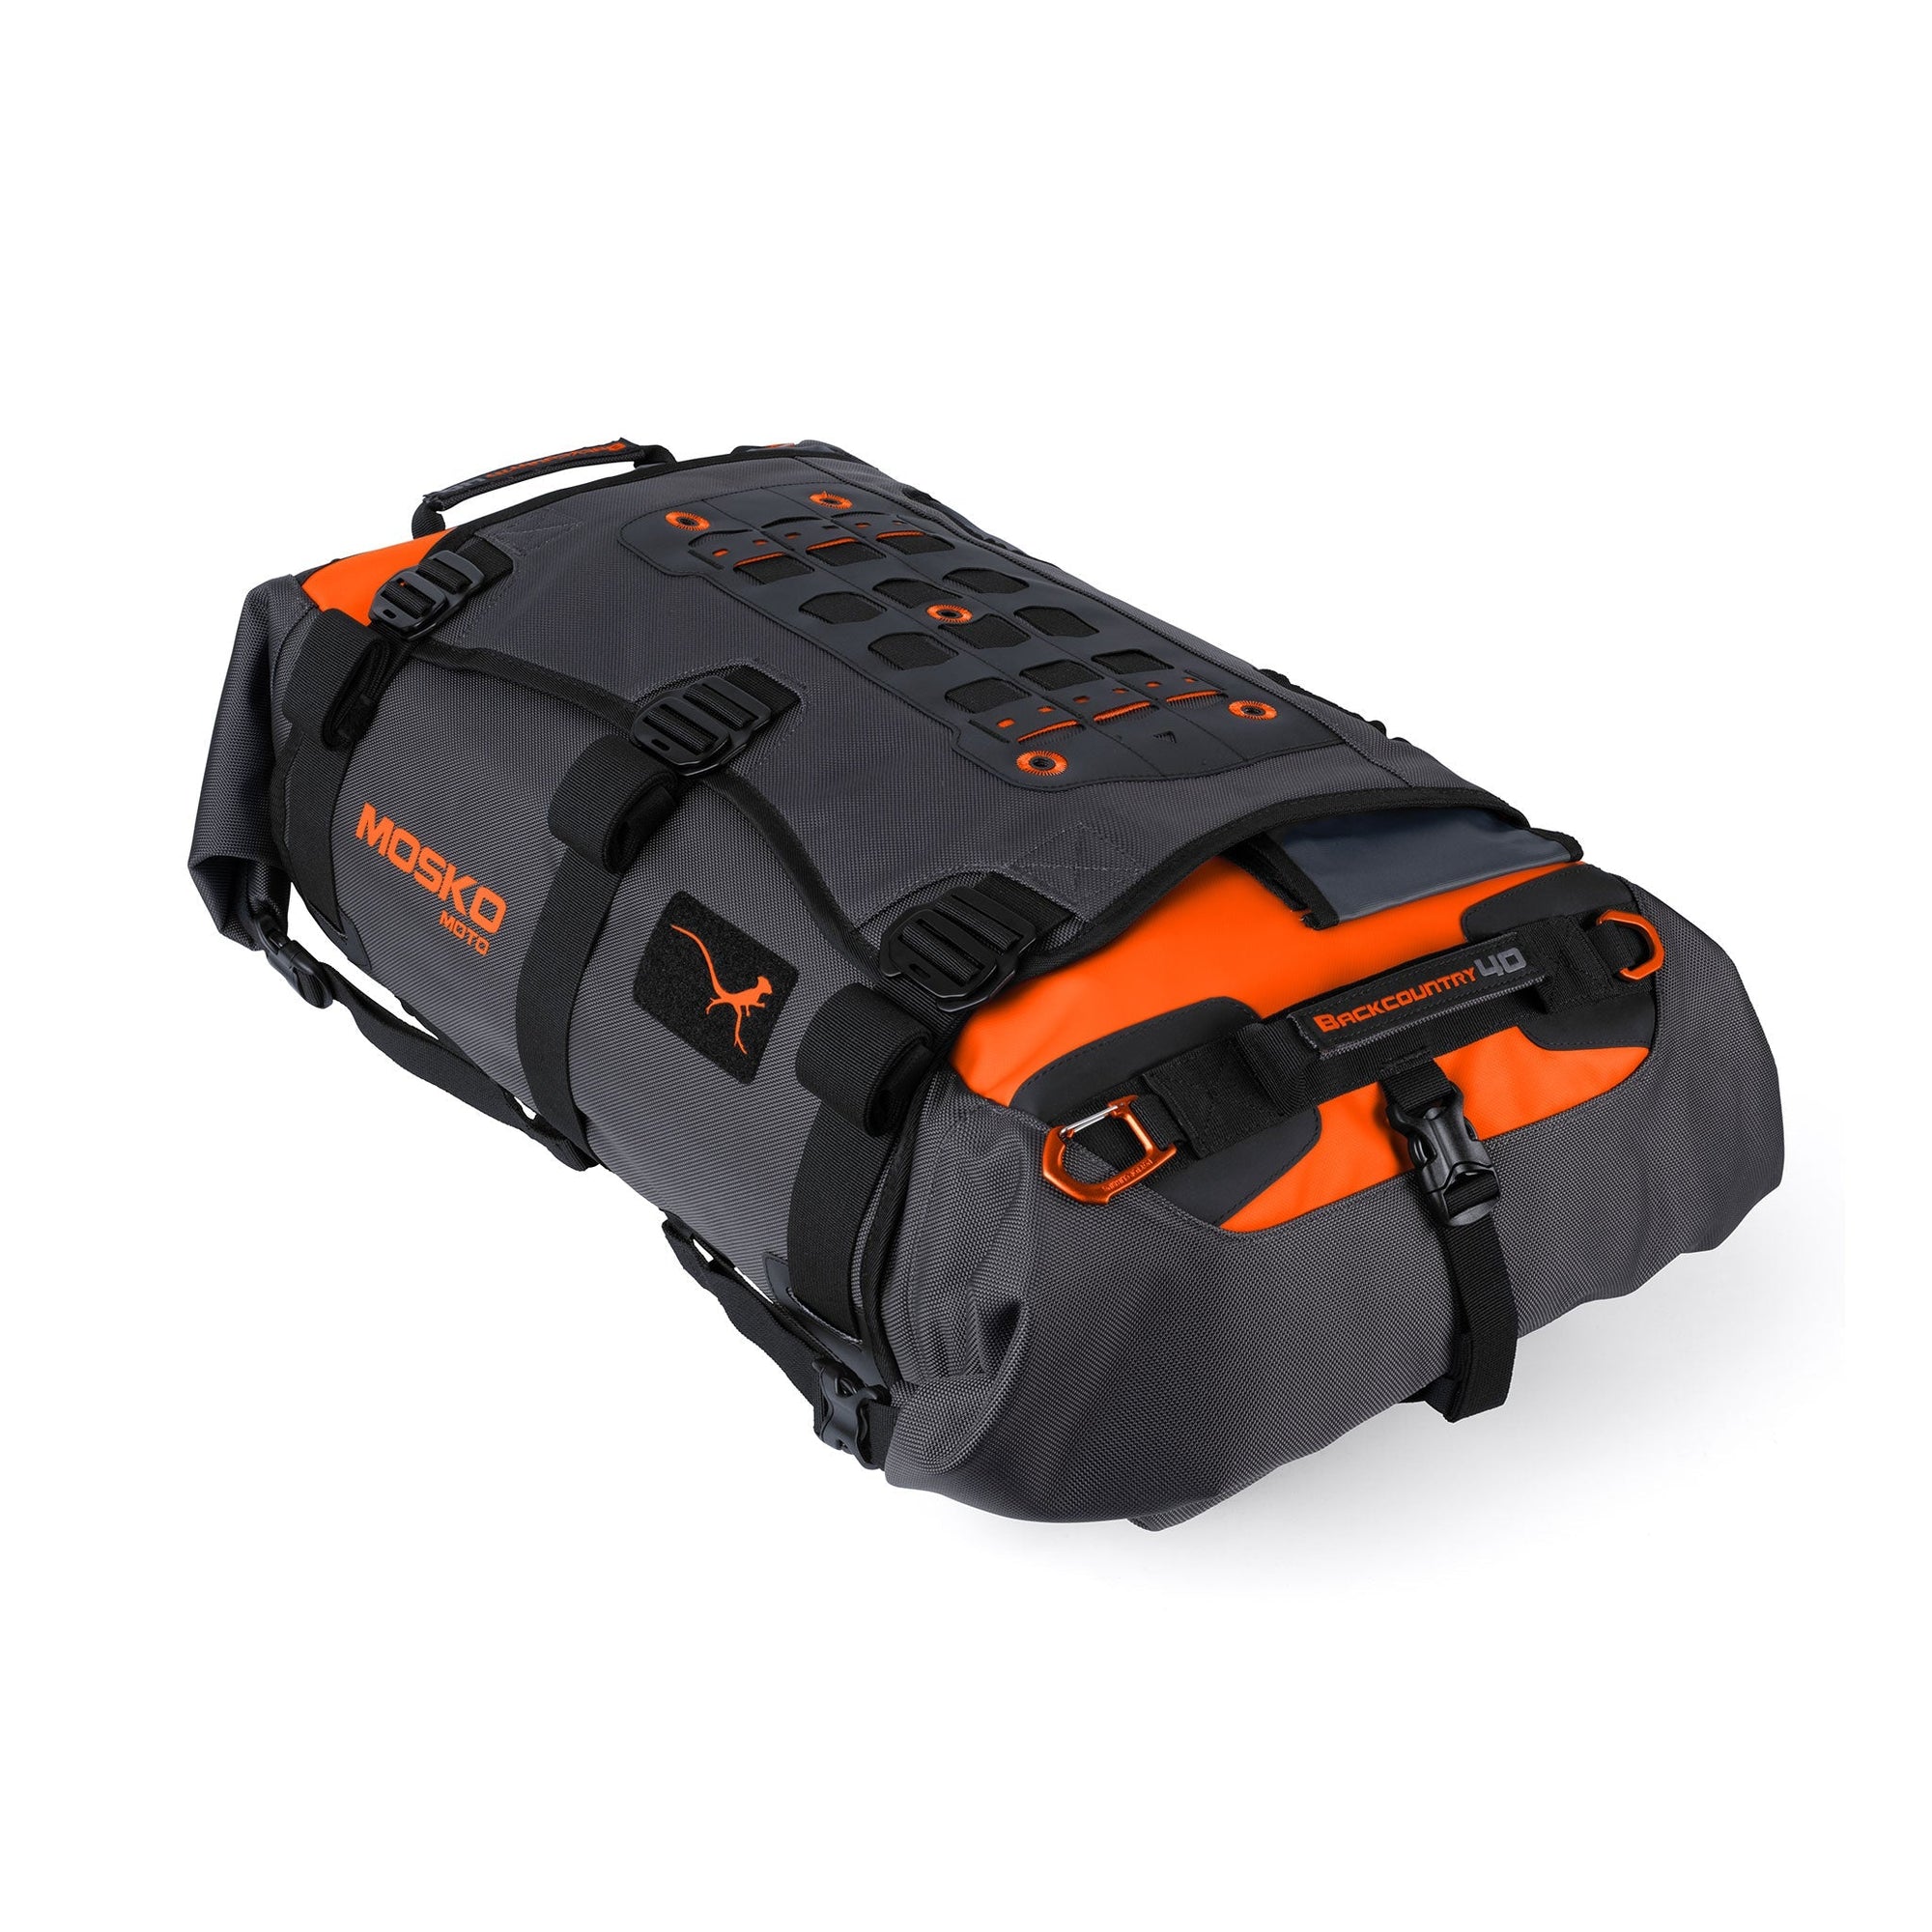 Mosko Moto Duffle Onyx/Orange / WITHOUT CINCH STRAPS Backcountry 40L Duffle/Pack (V2.5)